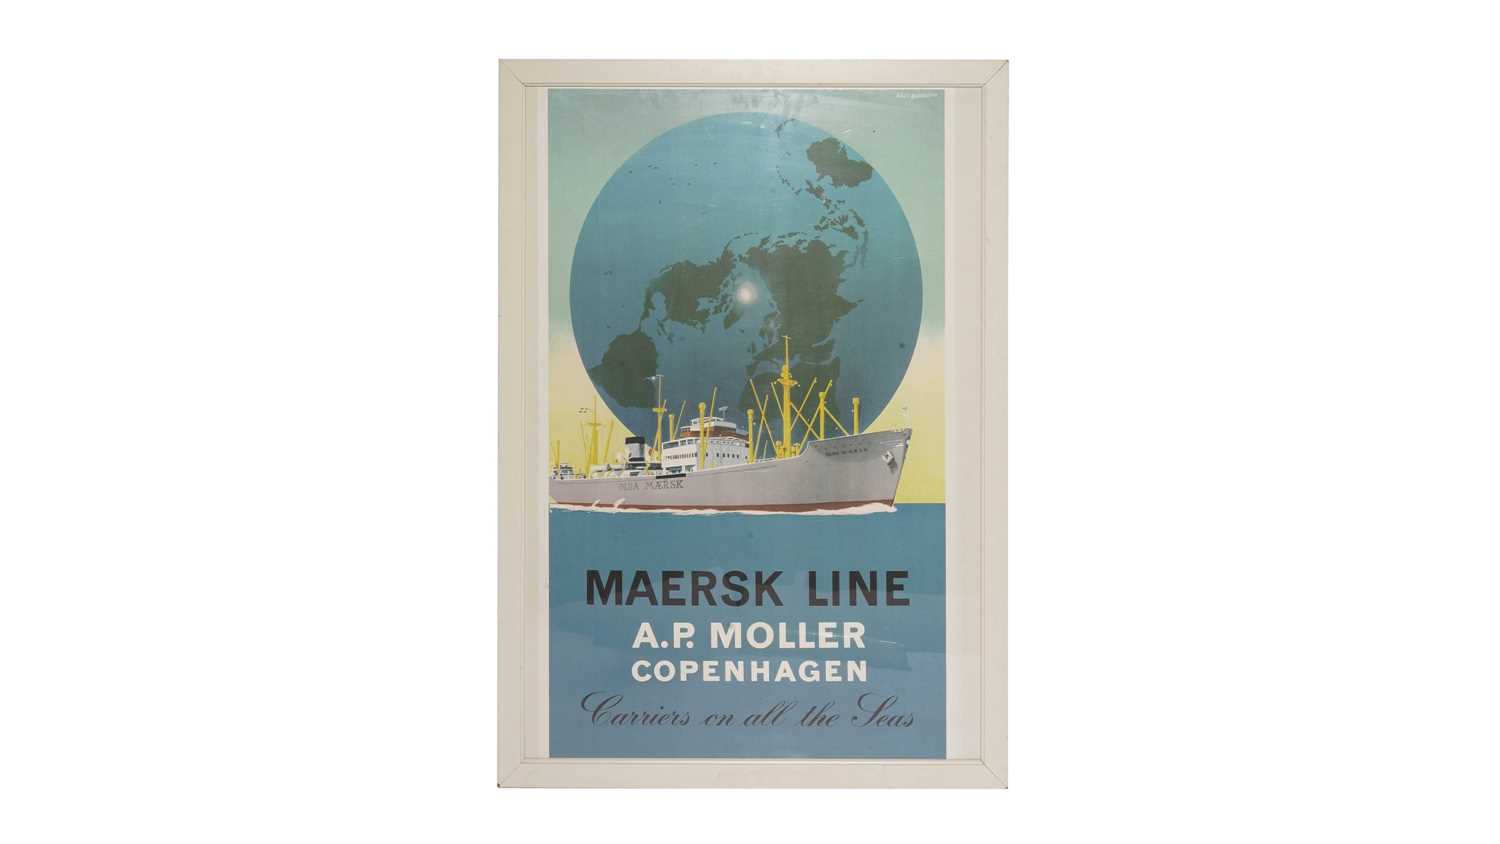 After Aage Rasmussen - Maersk Line and Odense advertising posters | offset lithographic prints